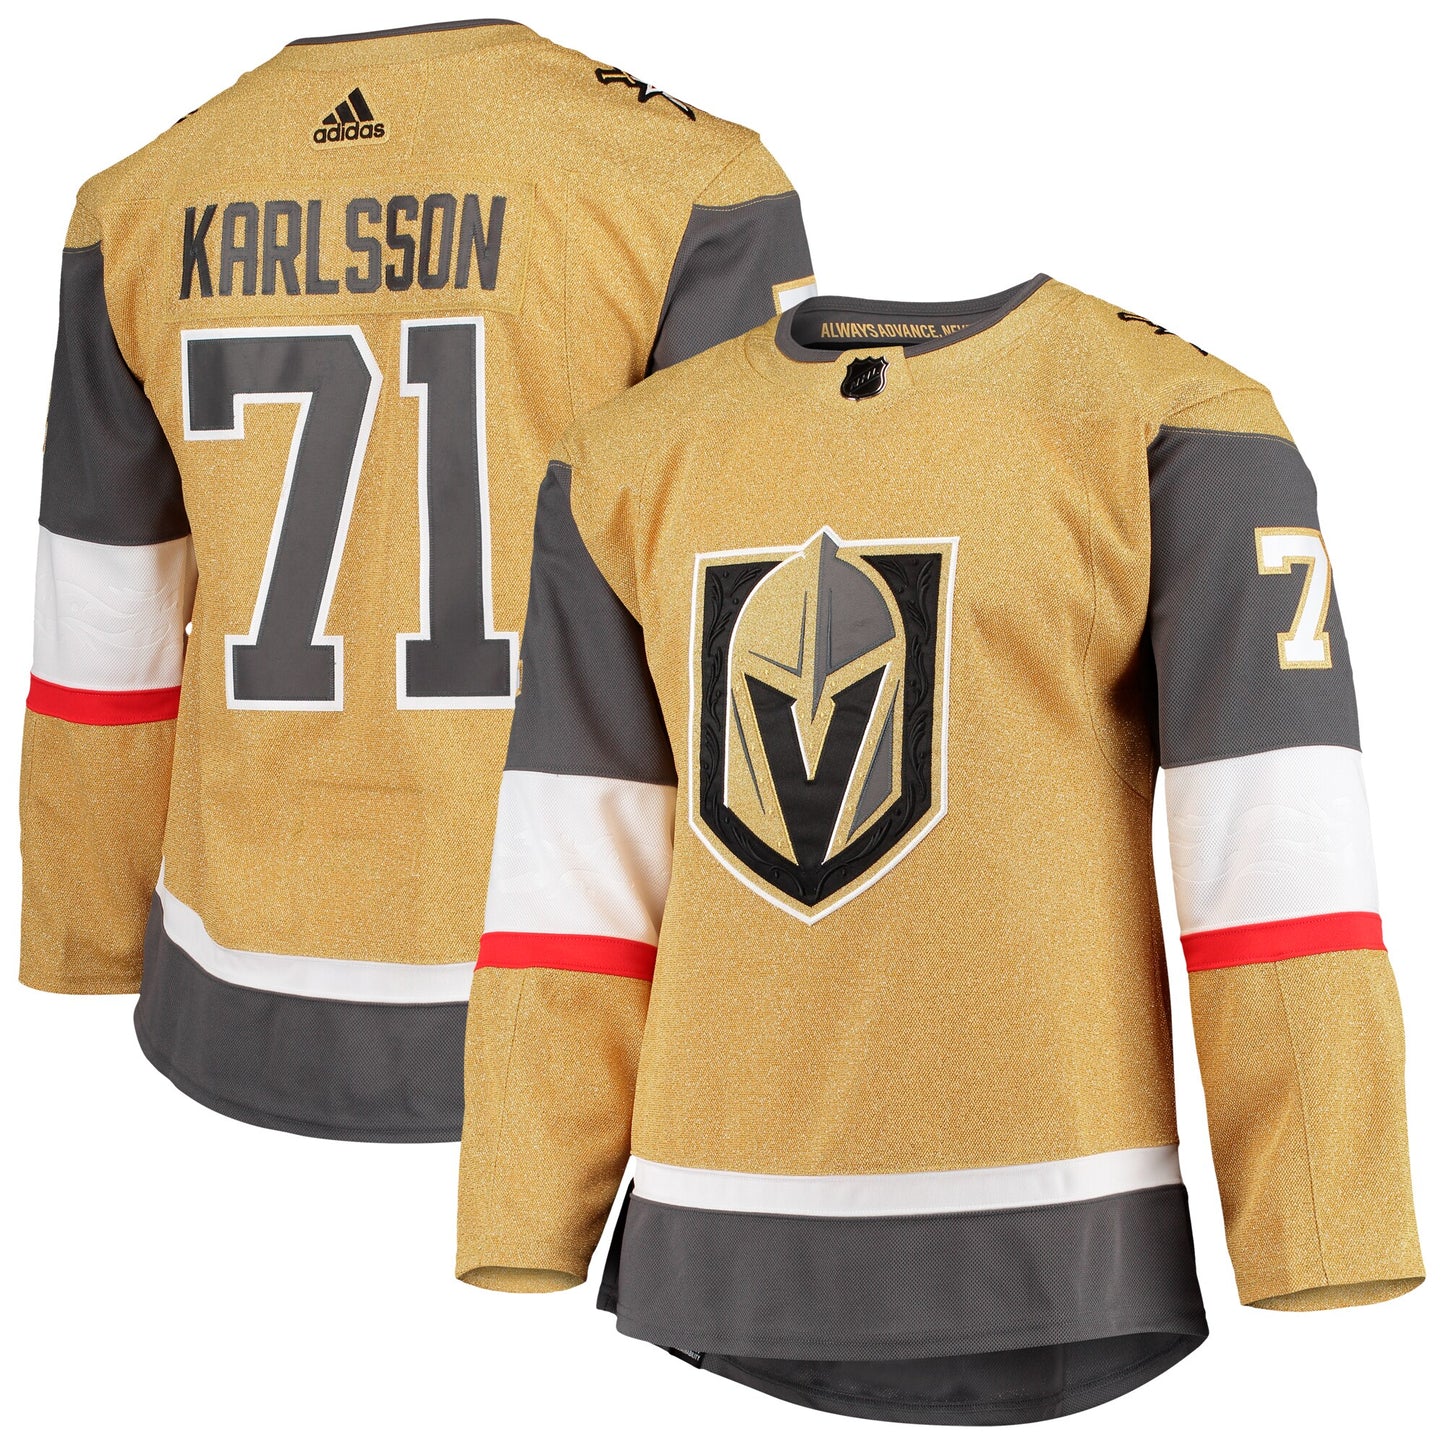 William Karlsson Vegas Golden Knights adidas Home Primegreen Authentic Pro Player Jersey - Gold